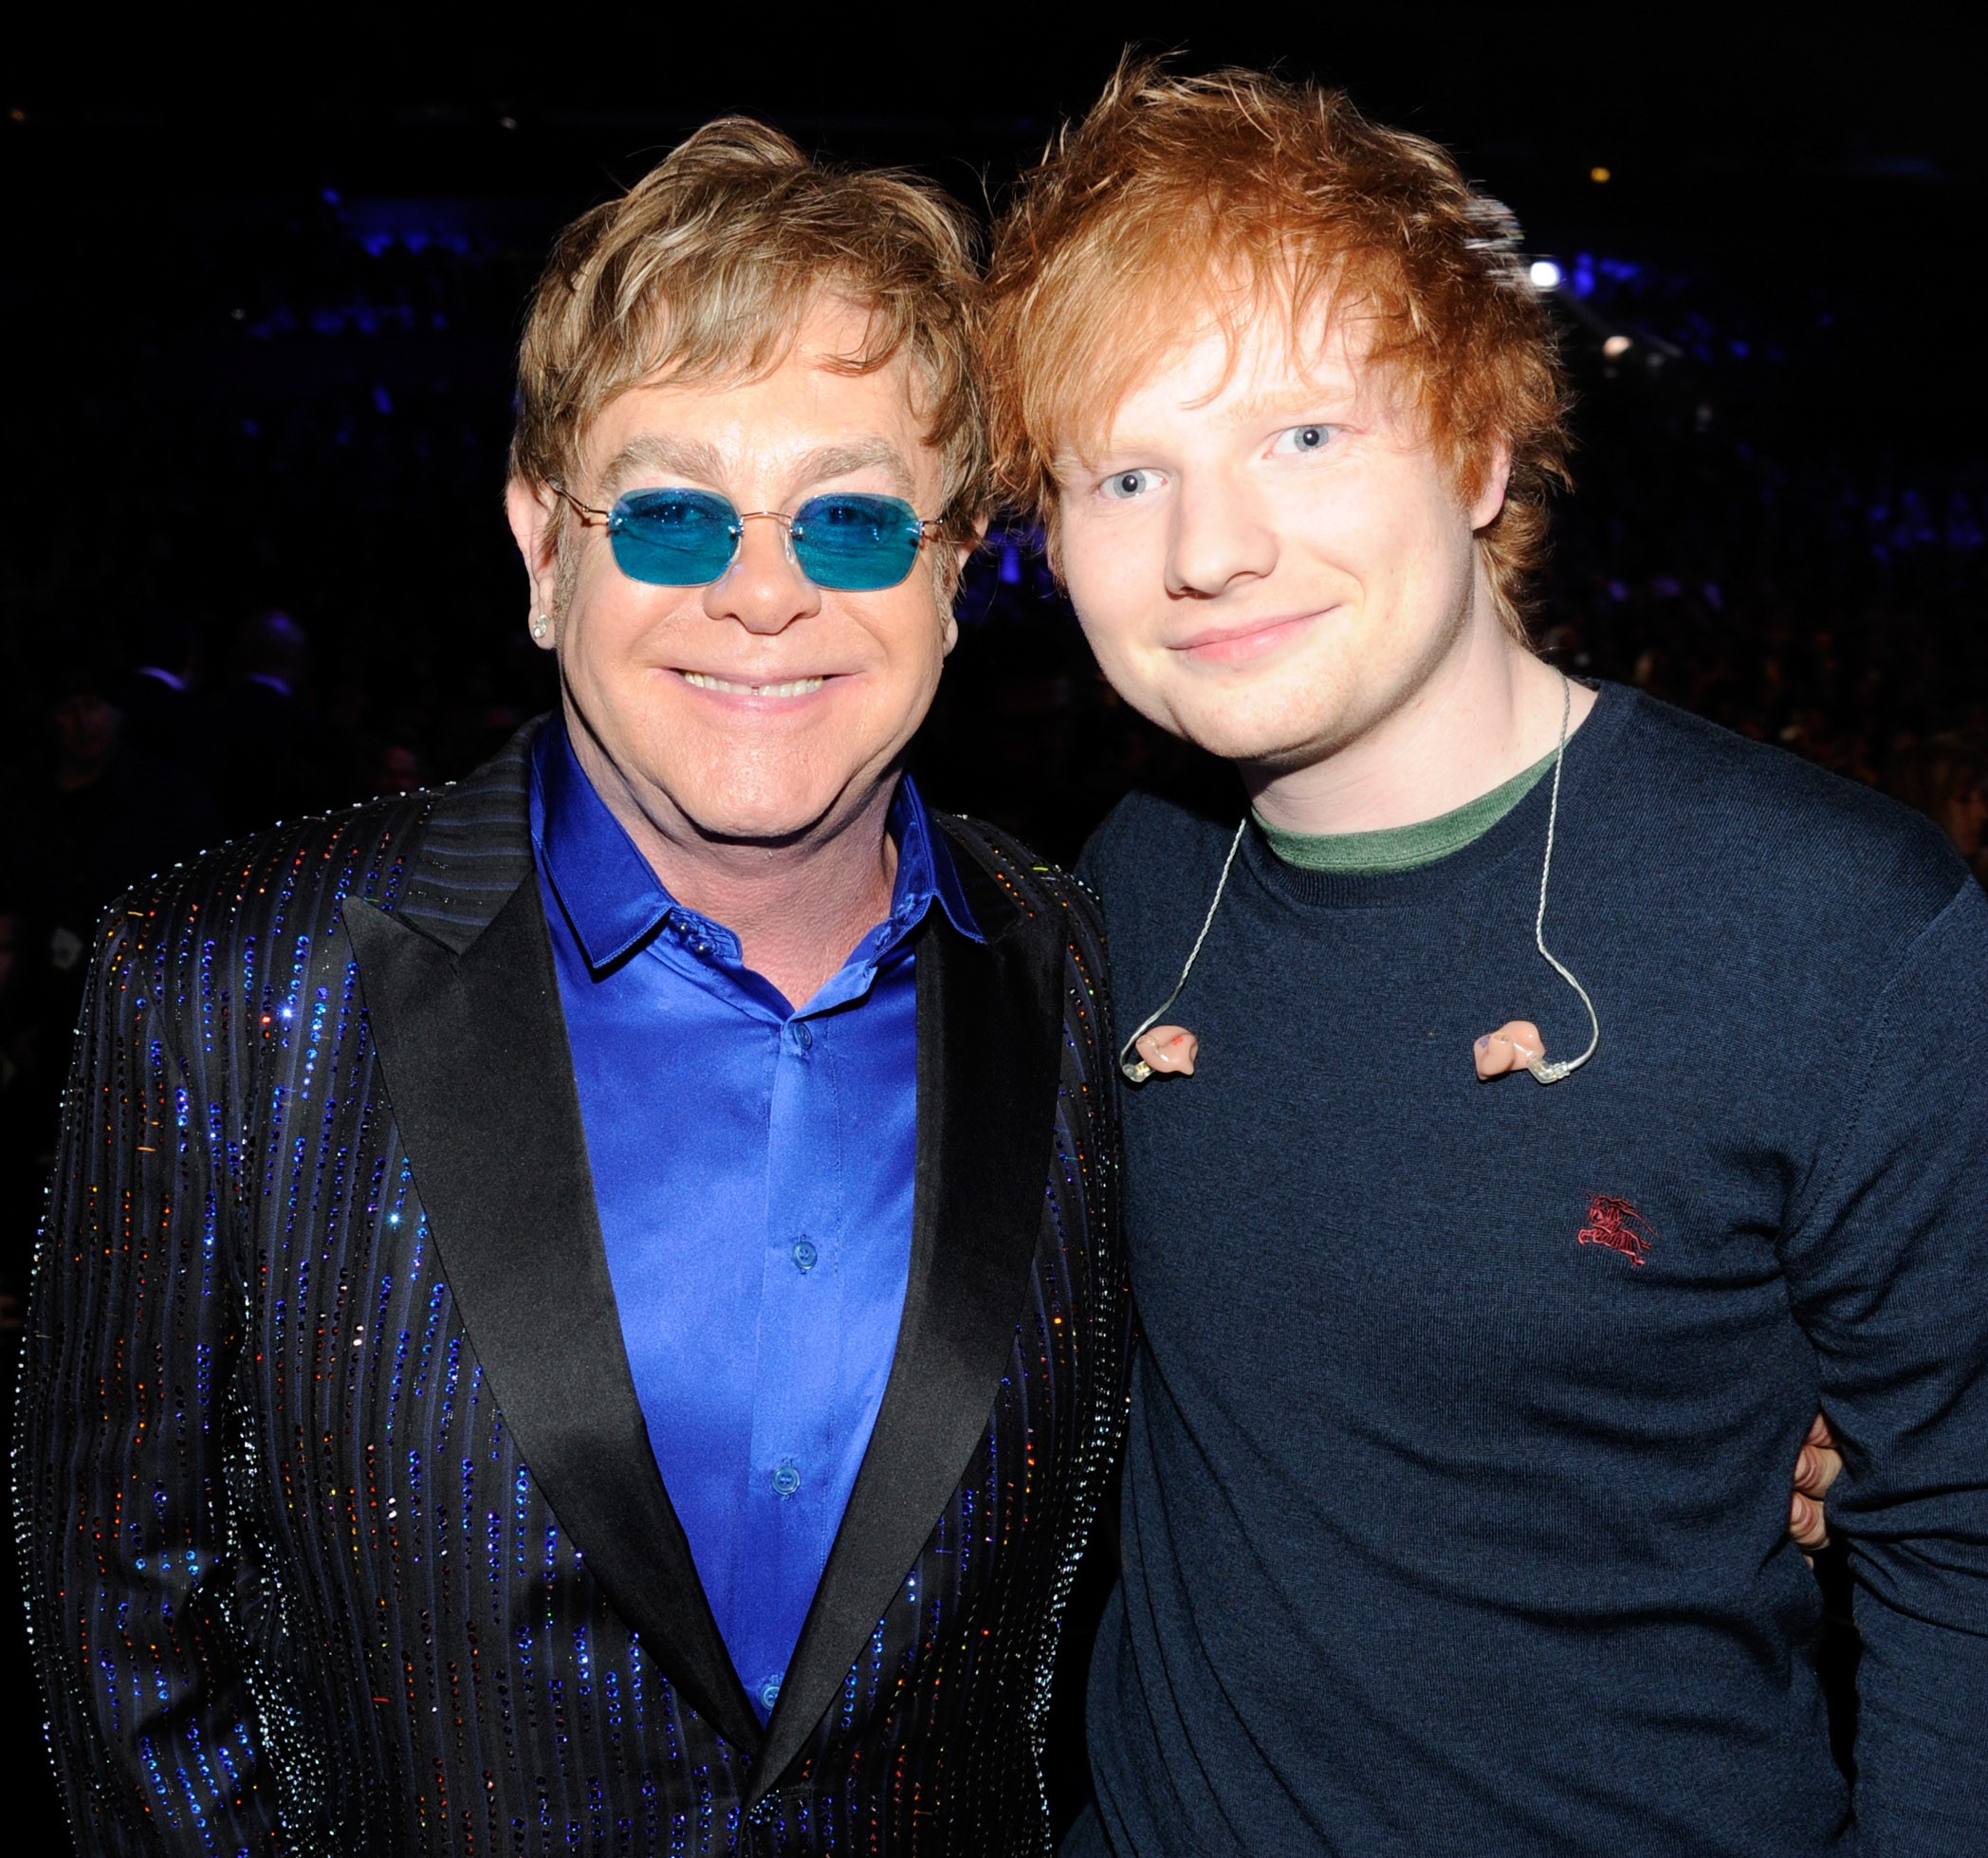 Elton John and Ed Sheeran pose for a photo together at the 55th Annual GRAMMY Awards